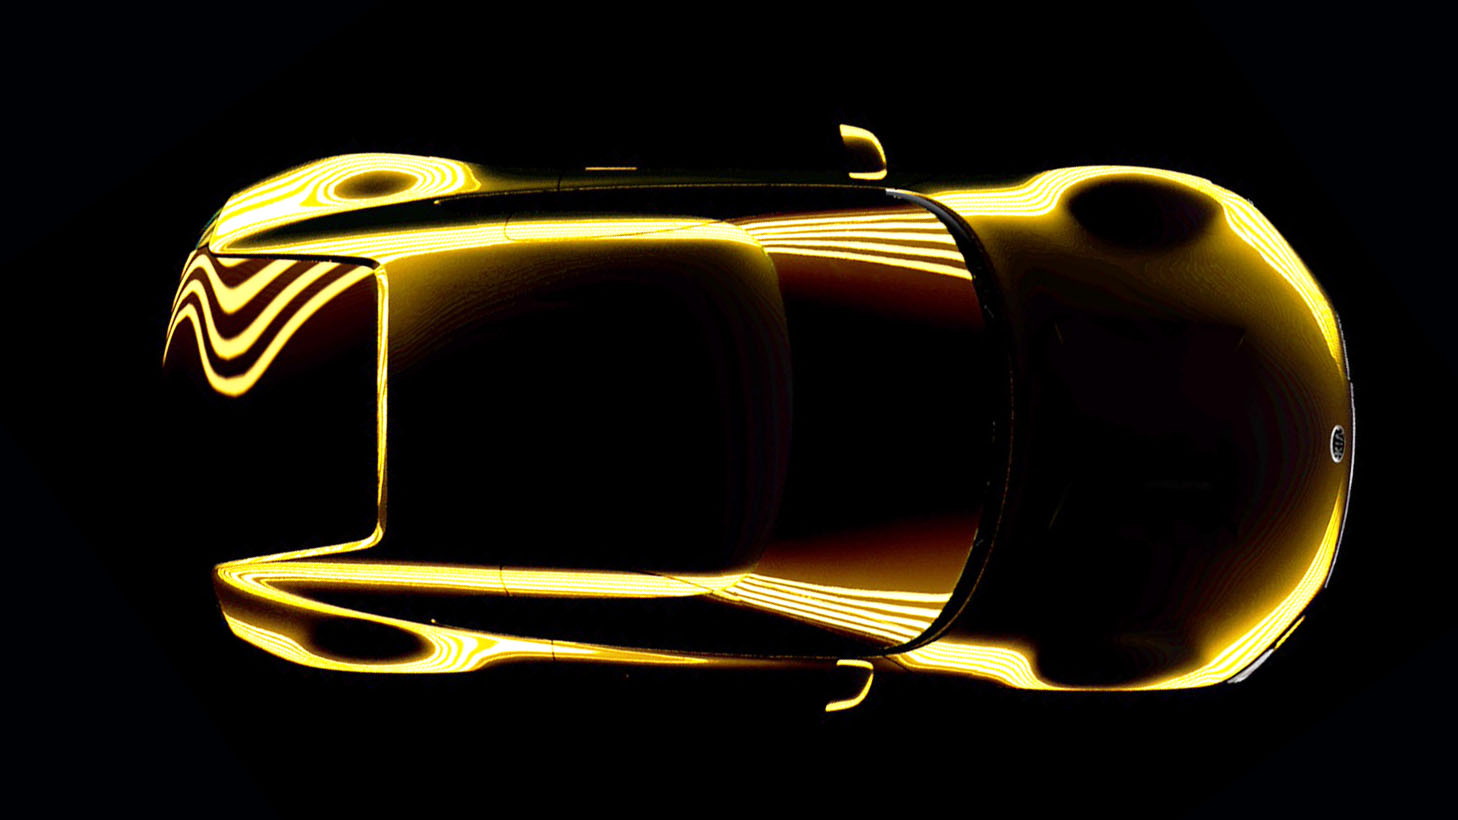 Teaser image of Kia 2+2 sports car concept due at the 2014 Detroit Auto Show